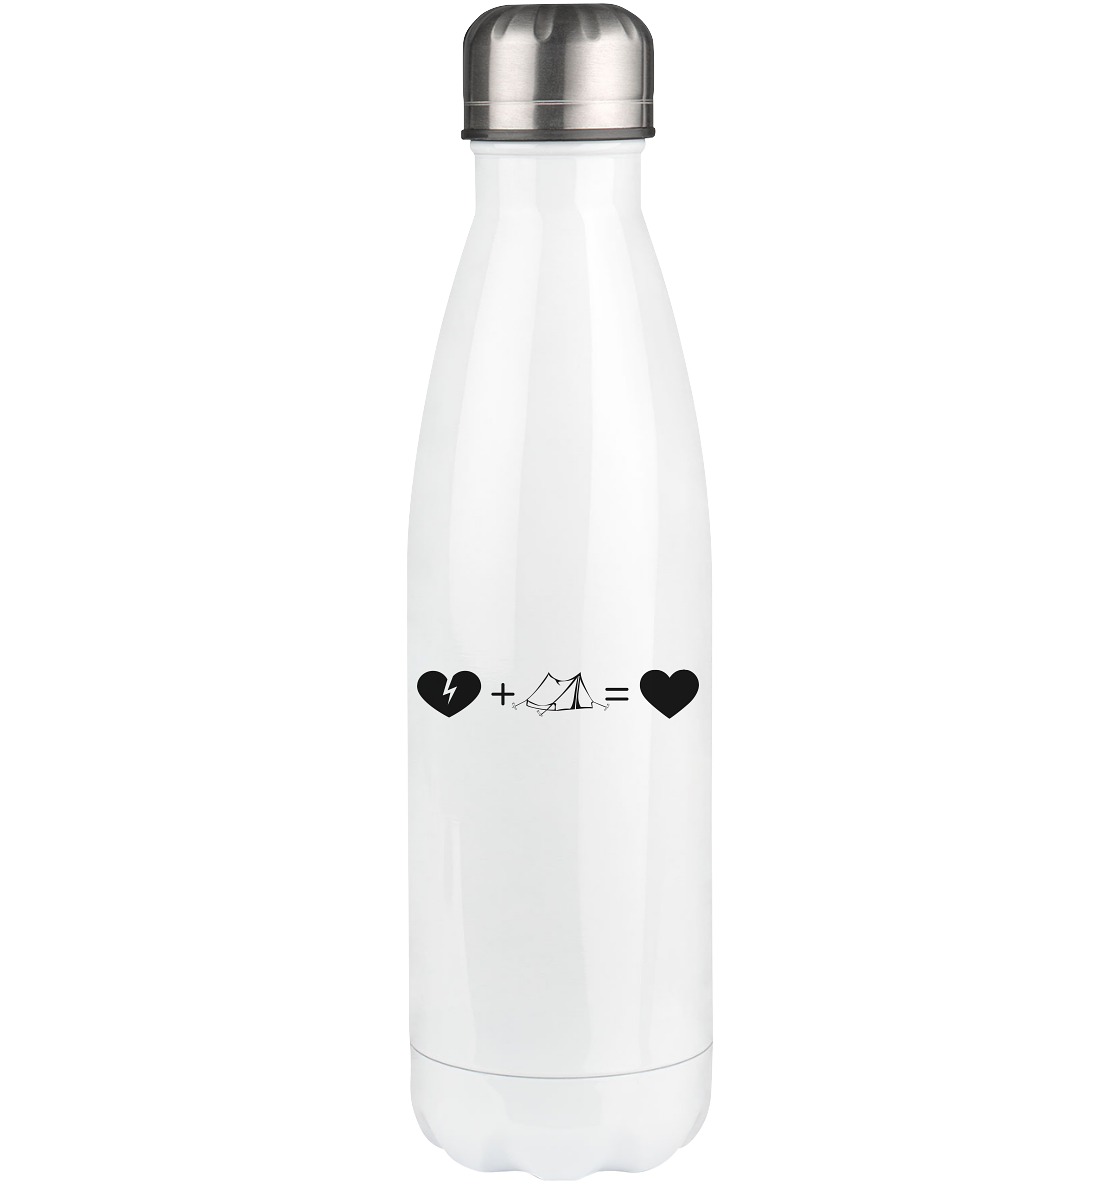 Broken Heart Heart and Camping 1 - Edelstahl Thermosflasche camping UONP 500ml